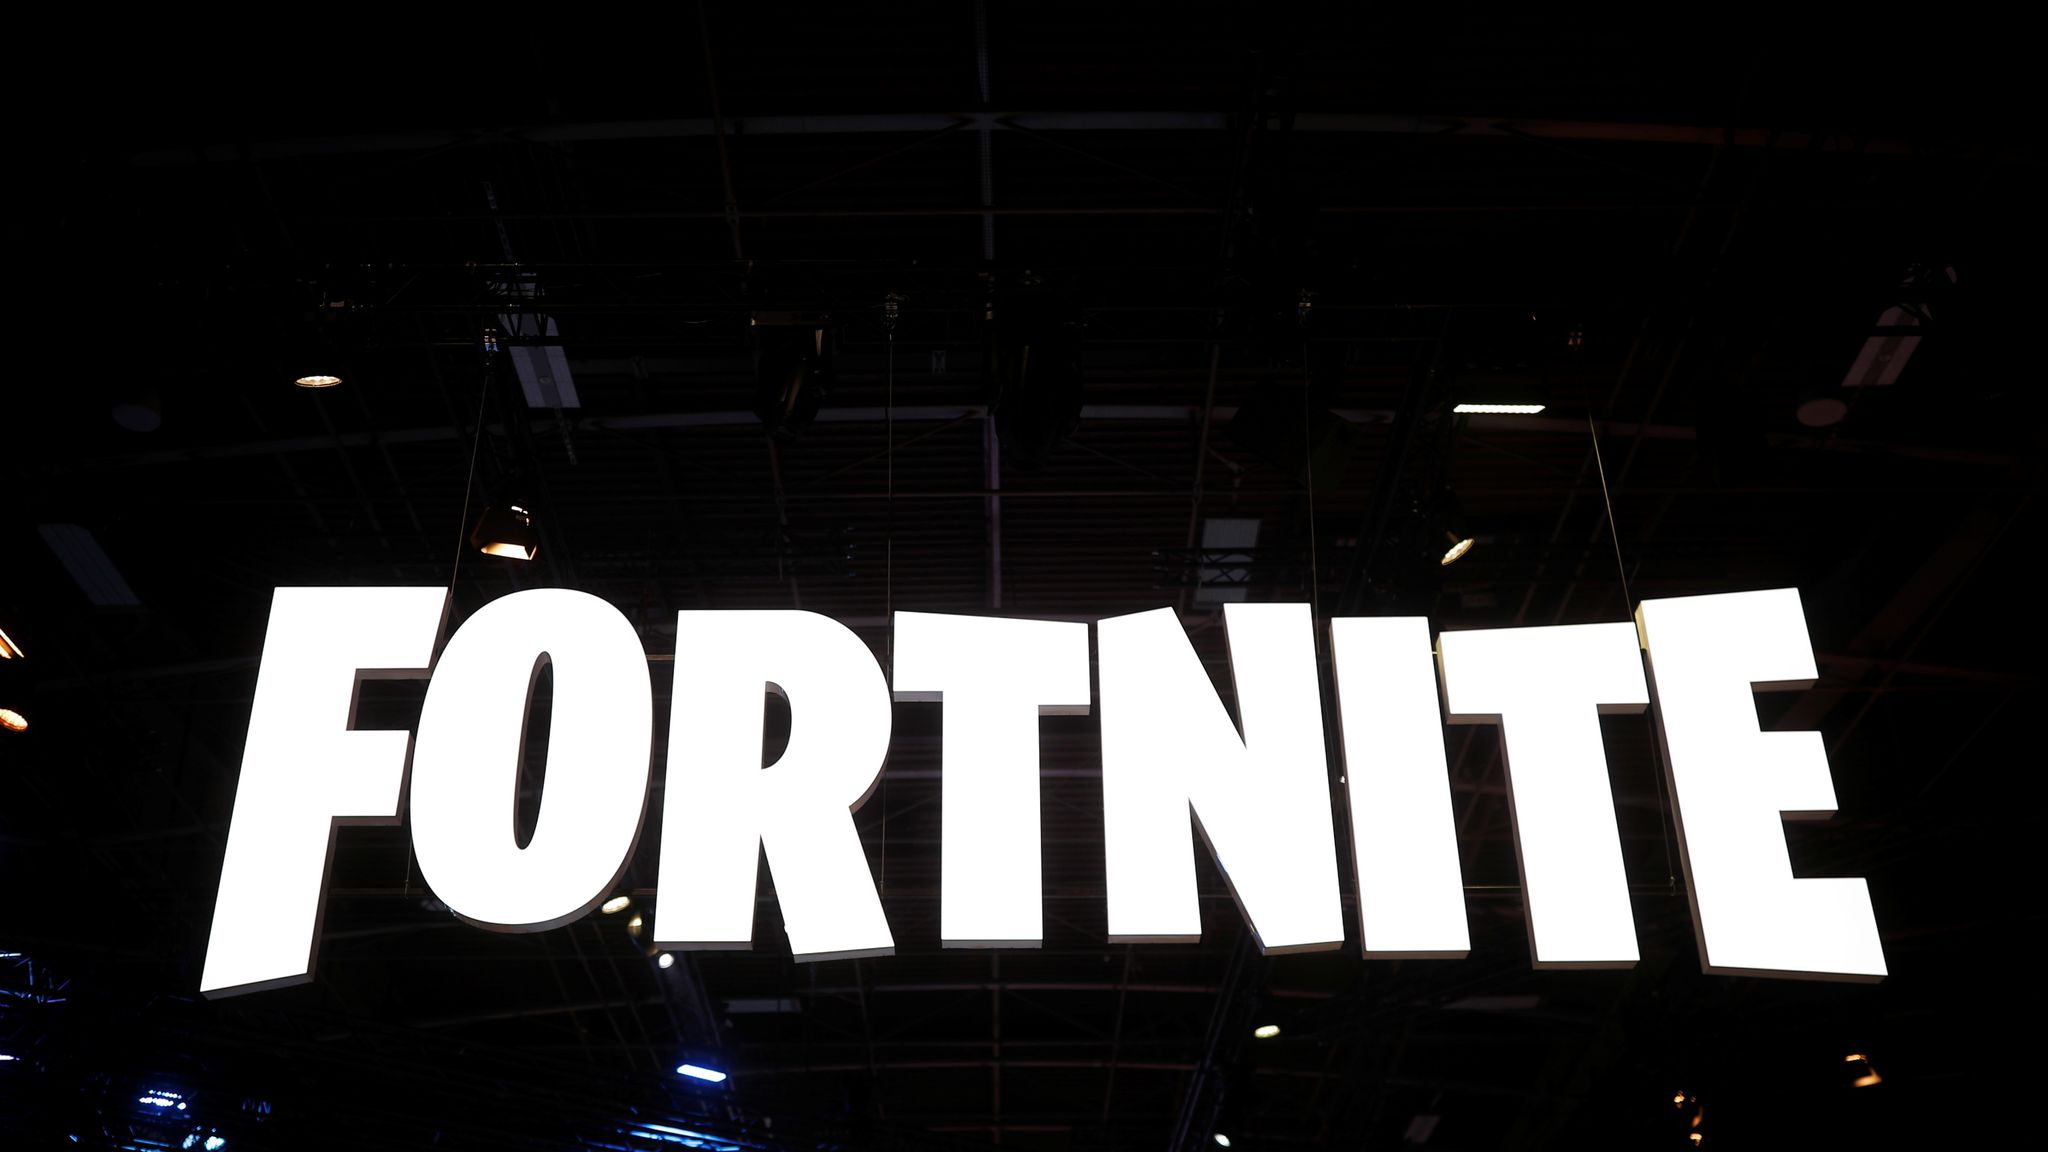 Fortnite Player Charged With Assaulting Partner During Live Stream